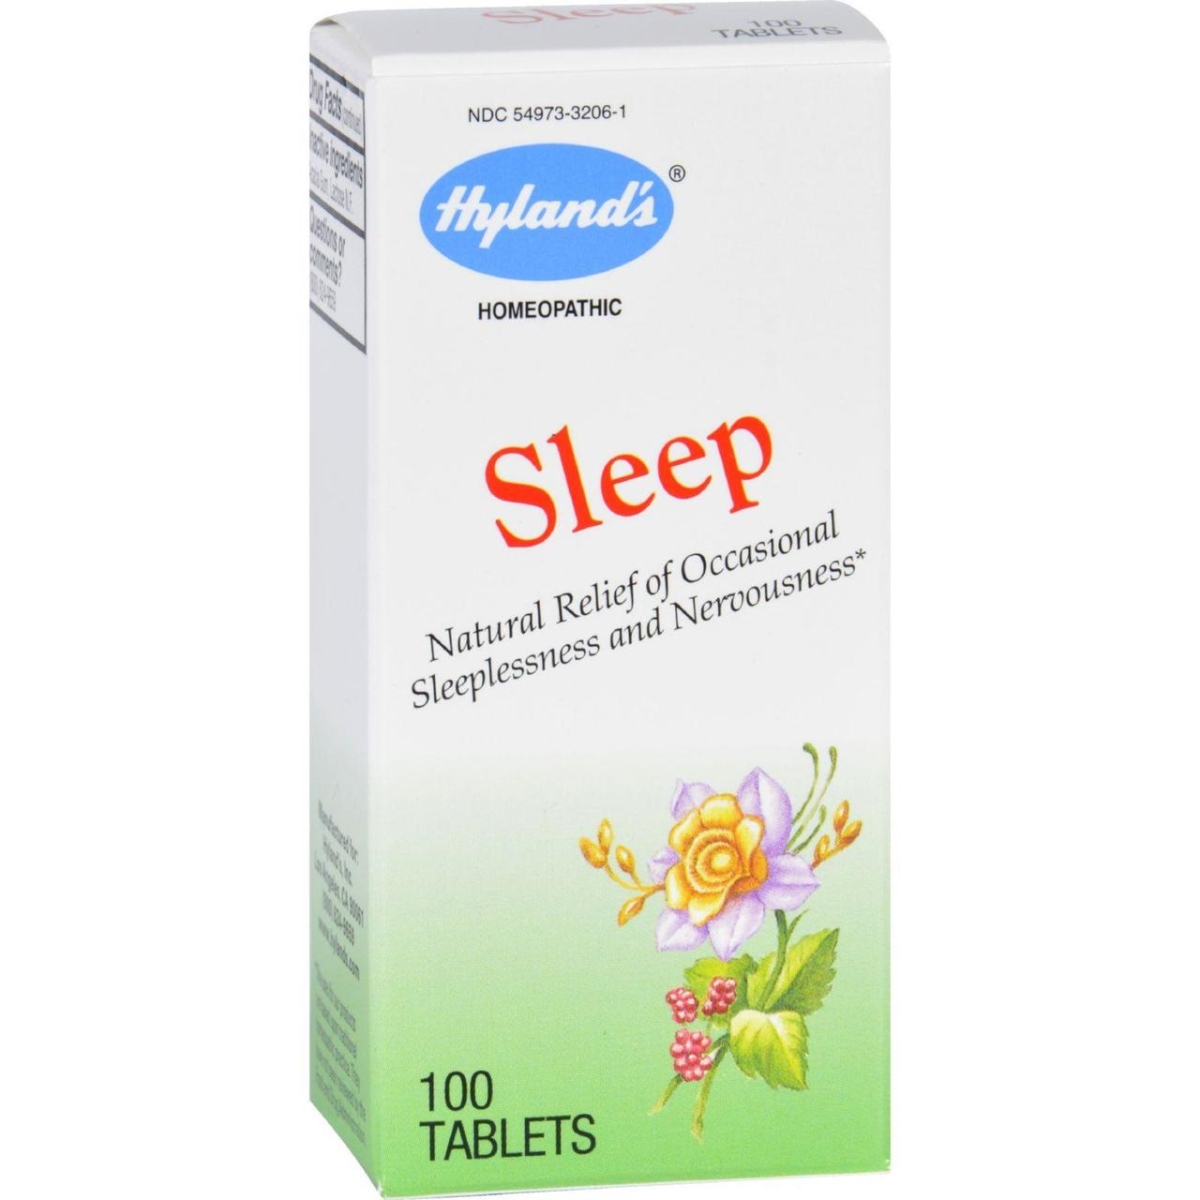 Hg1695220 Homeopathic Sleep - 100 Tablets